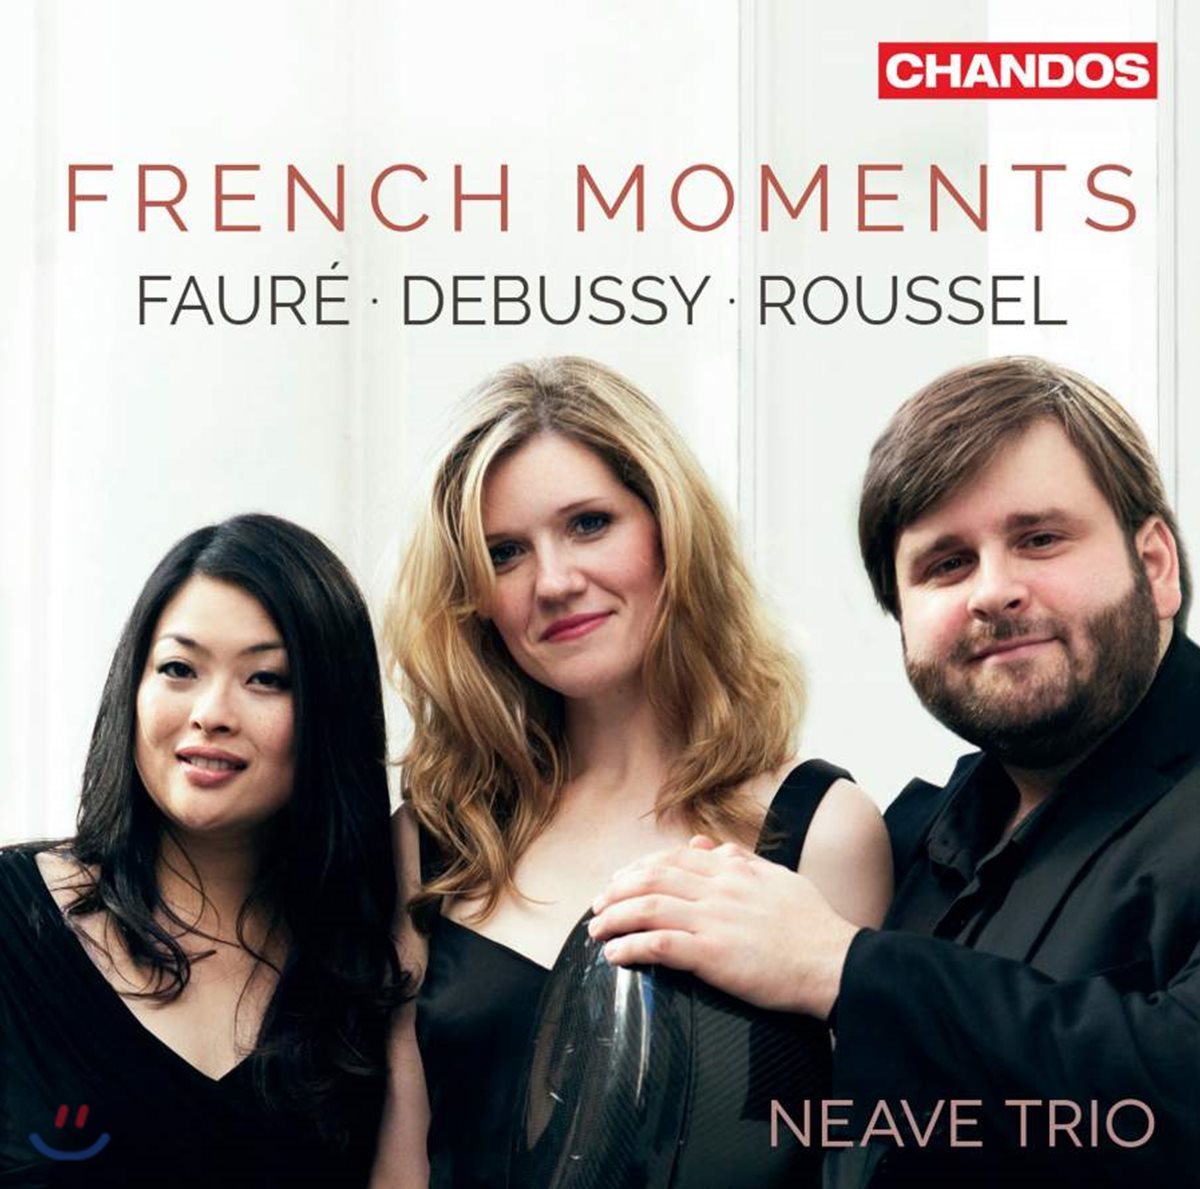 Neave Piano Trio 프랑스 피아노 트리오 - 루셀 / 드뷔시 / 포레 (French Moments)